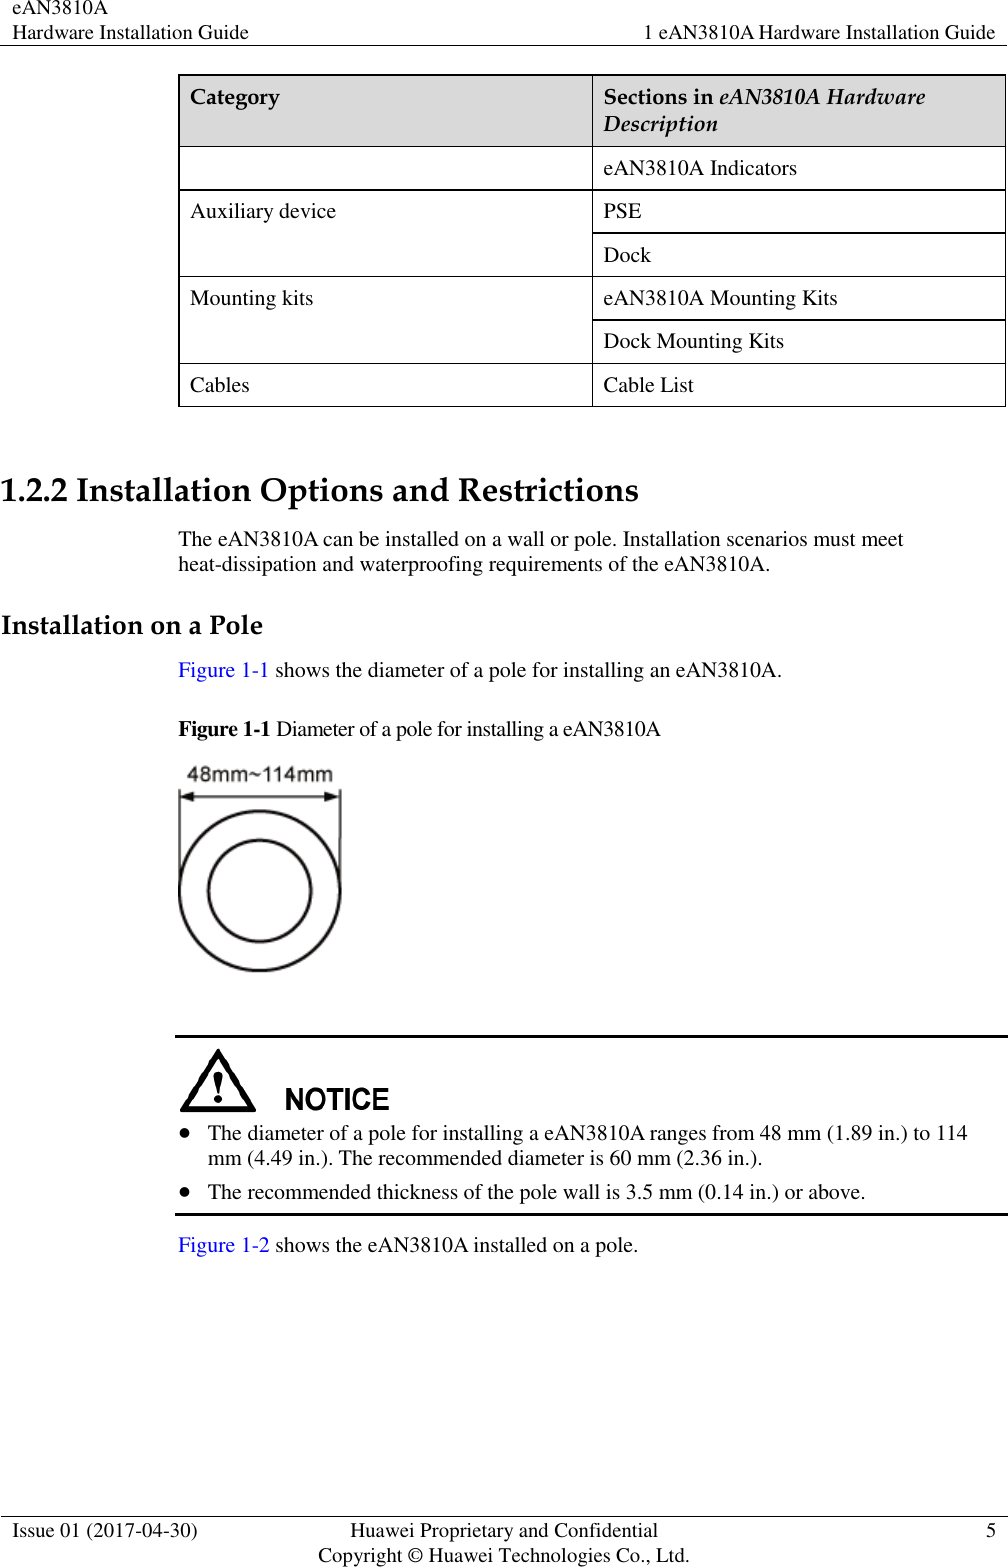 eAN3810A   Hardware Installation Guide 1 eAN3810A Hardware Installation Guide  Issue 01 (2017-04-30) Huawei Proprietary and Confidential                                     Copyright © Huawei Technologies Co., Ltd. 5  Category Sections in eAN3810A Hardware Description eAN3810A Indicators Auxiliary device PSE Dock Mounting kits eAN3810A Mounting Kits Dock Mounting Kits Cables Cable List  1.2.2 Installation Options and Restrictions The eAN3810A can be installed on a wall or pole. Installation scenarios must meet heat-dissipation and waterproofing requirements of the eAN3810A. Installation on a Pole Figure 1-1 shows the diameter of a pole for installing an eAN3810A.   Figure 1-1 Diameter of a pole for installing a eAN3810A     The diameter of a pole for installing a eAN3810A ranges from 48 mm (1.89 in.) to 114 mm (4.49 in.). The recommended diameter is 60 mm (2.36 in.).  The recommended thickness of the pole wall is 3.5 mm (0.14 in.) or above.   Figure 1-2 shows the eAN3810A installed on a pole. 